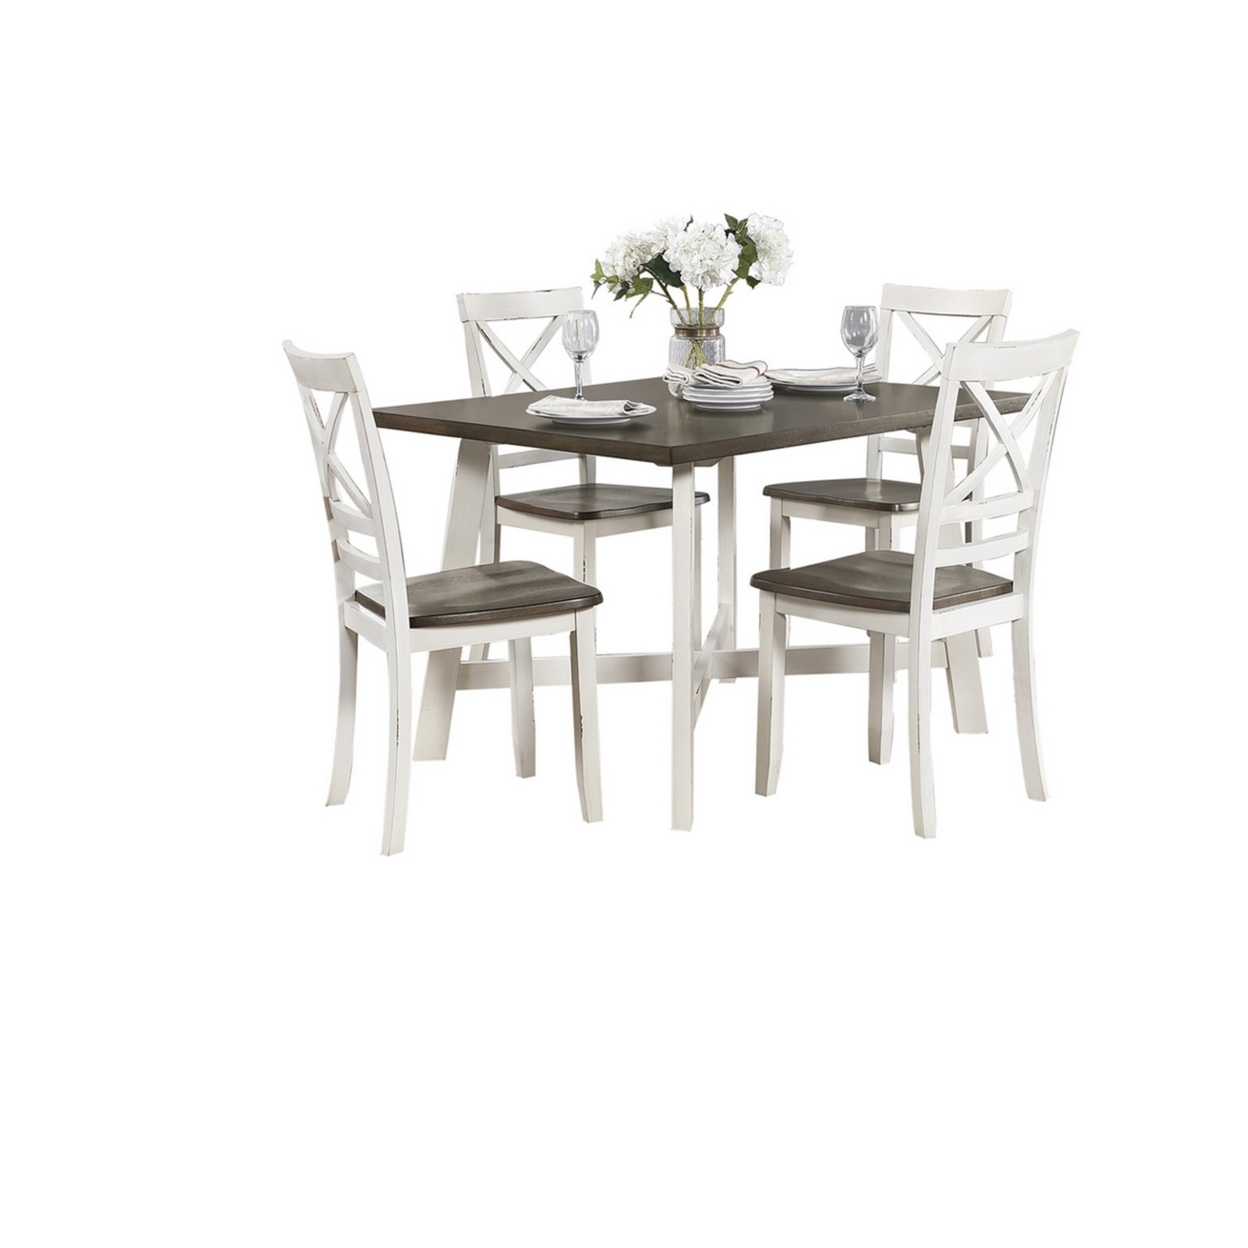 Transitional Style Wooden 5 Piece Dinette Set, Brown And White- Saltoro Sherpi